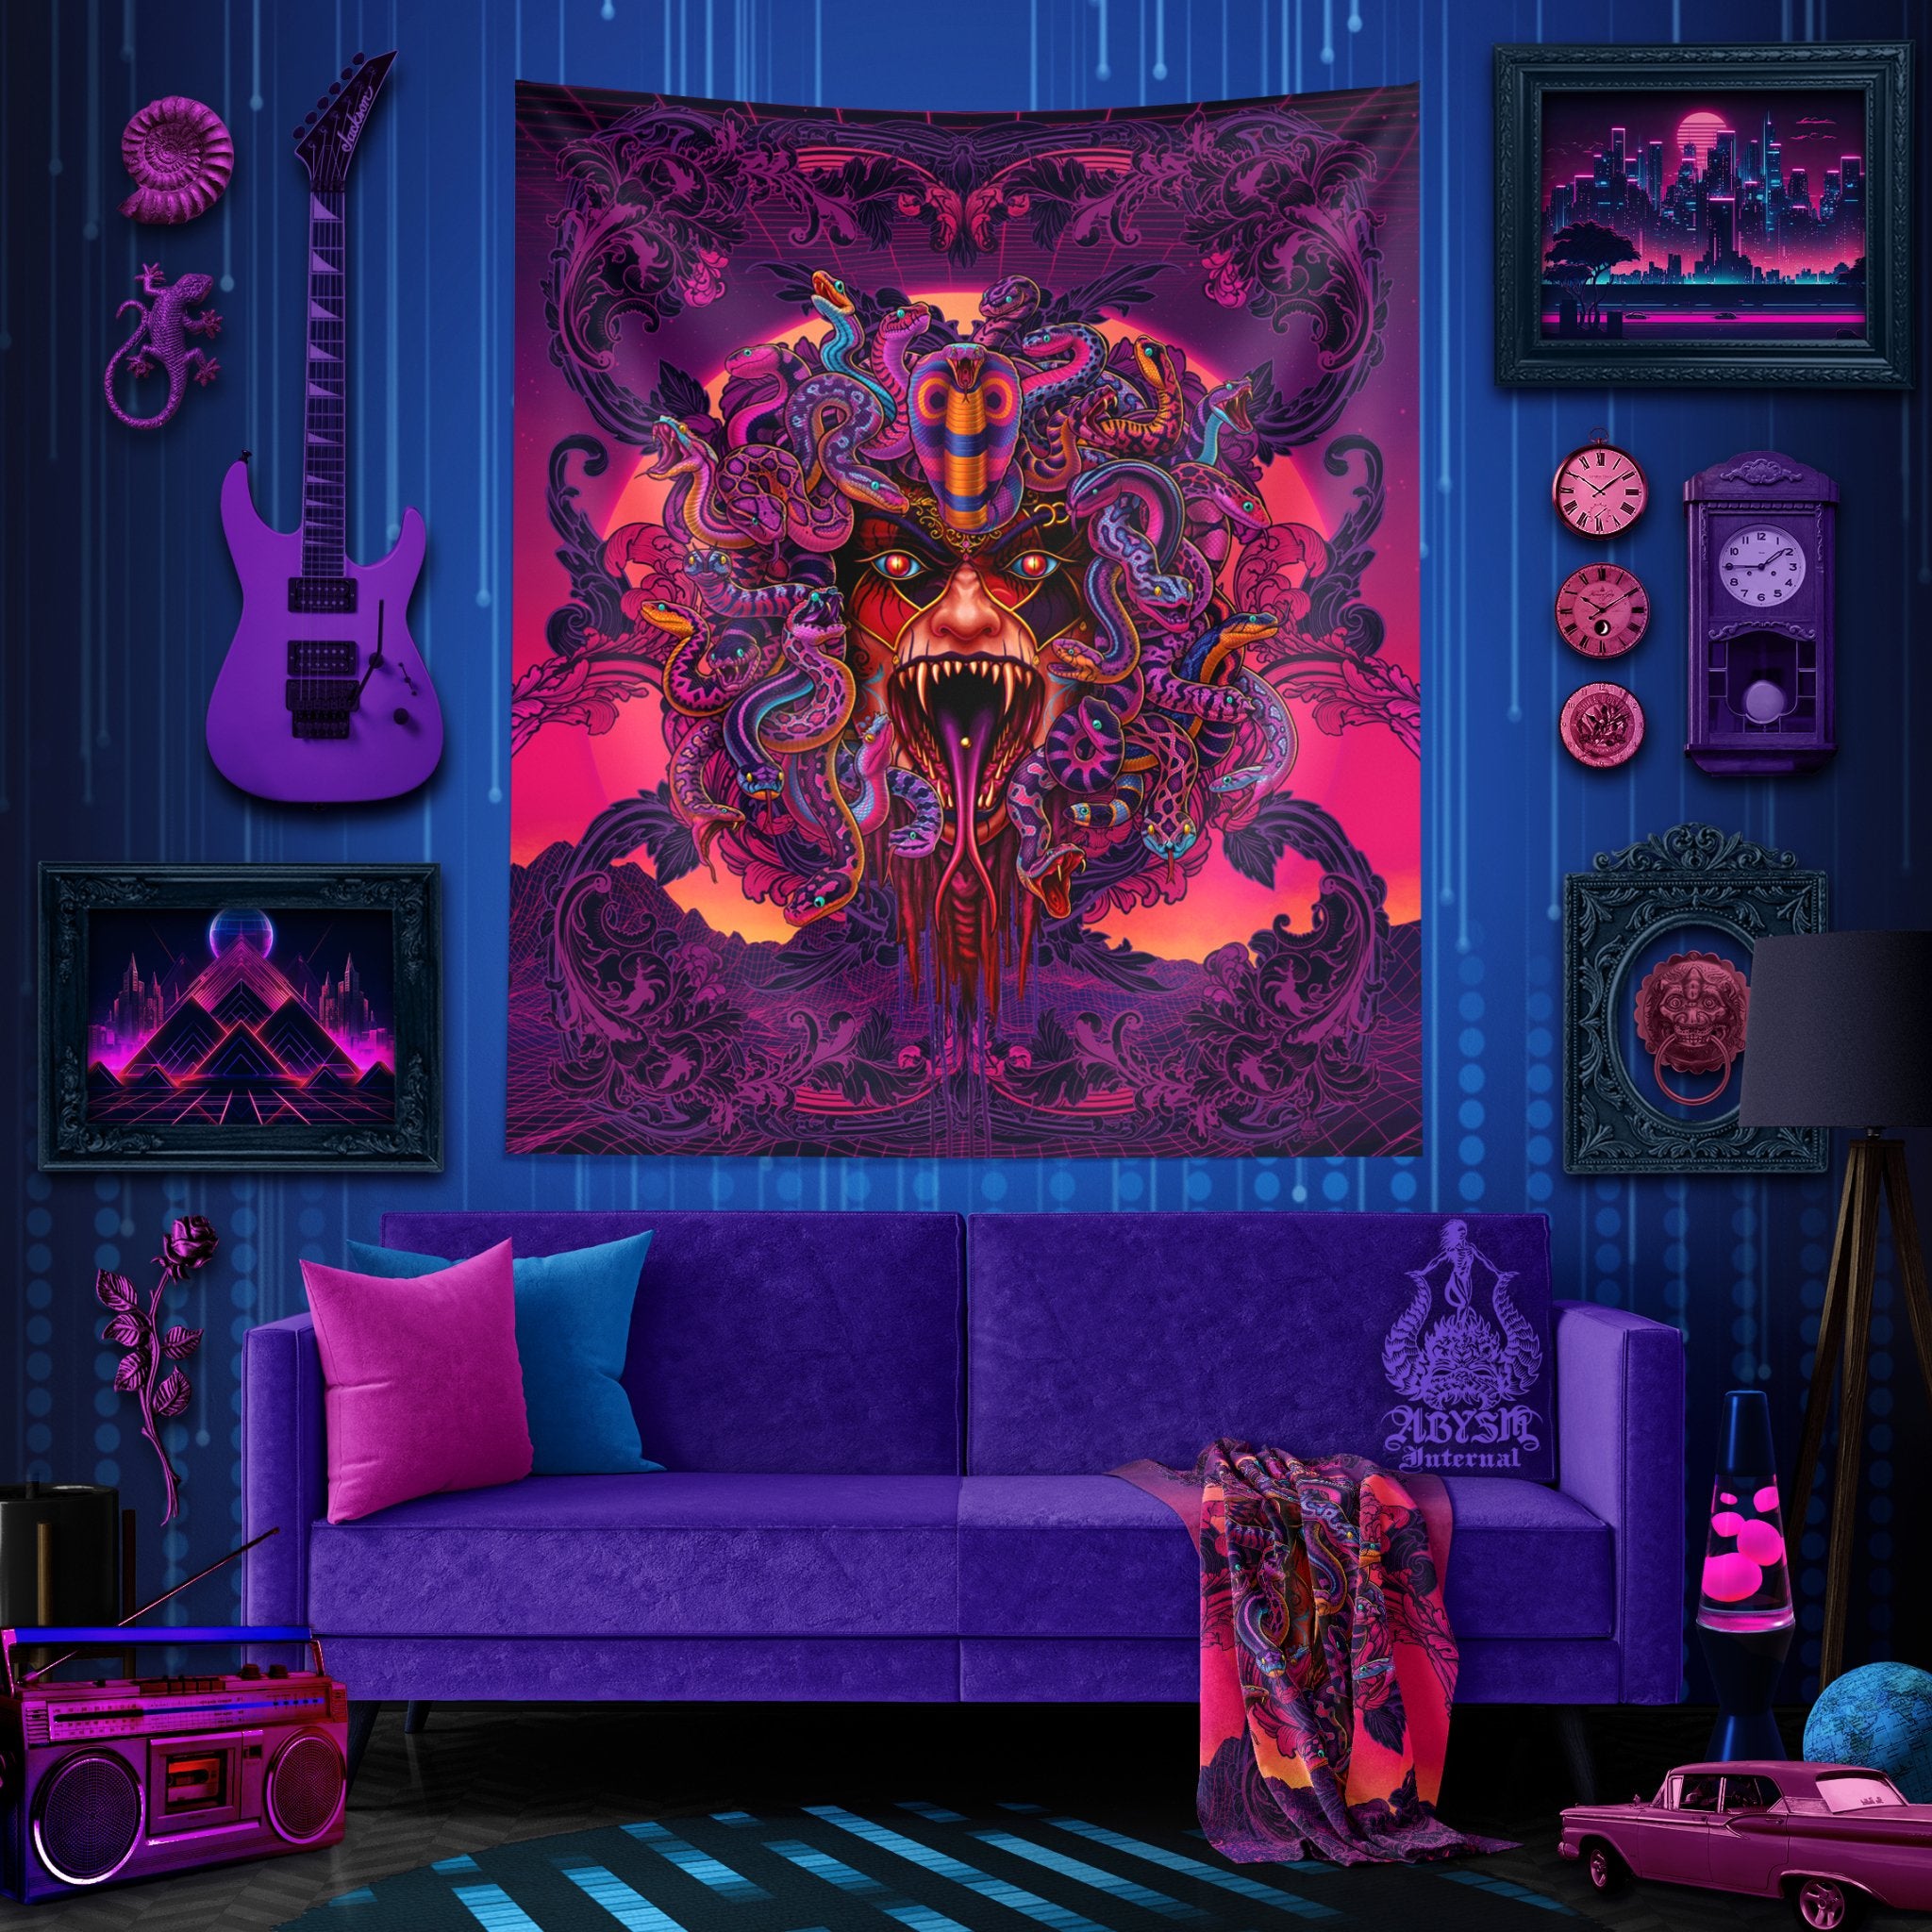 Psychedelic Tapestry, Magic Shrooms Wall Hanging, Vaporwave and Retrowave 80s Home Decor, Synthwave Skull Art Print, Kids Room - Medusa 4 Faces - Abysm Internal